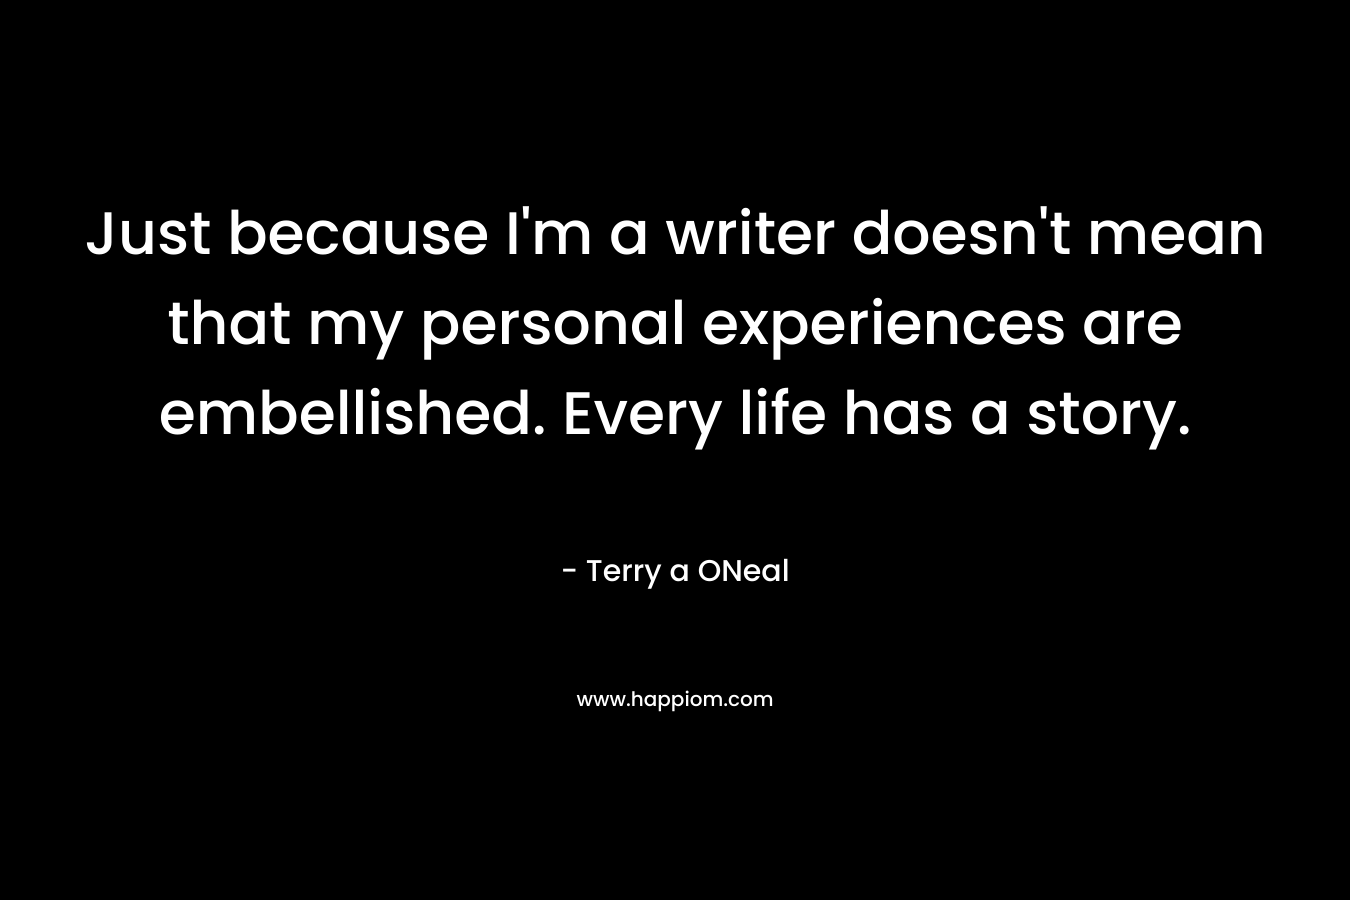 Just because I'm a writer doesn't mean that my personal experiences are embellished. Every life has a story.